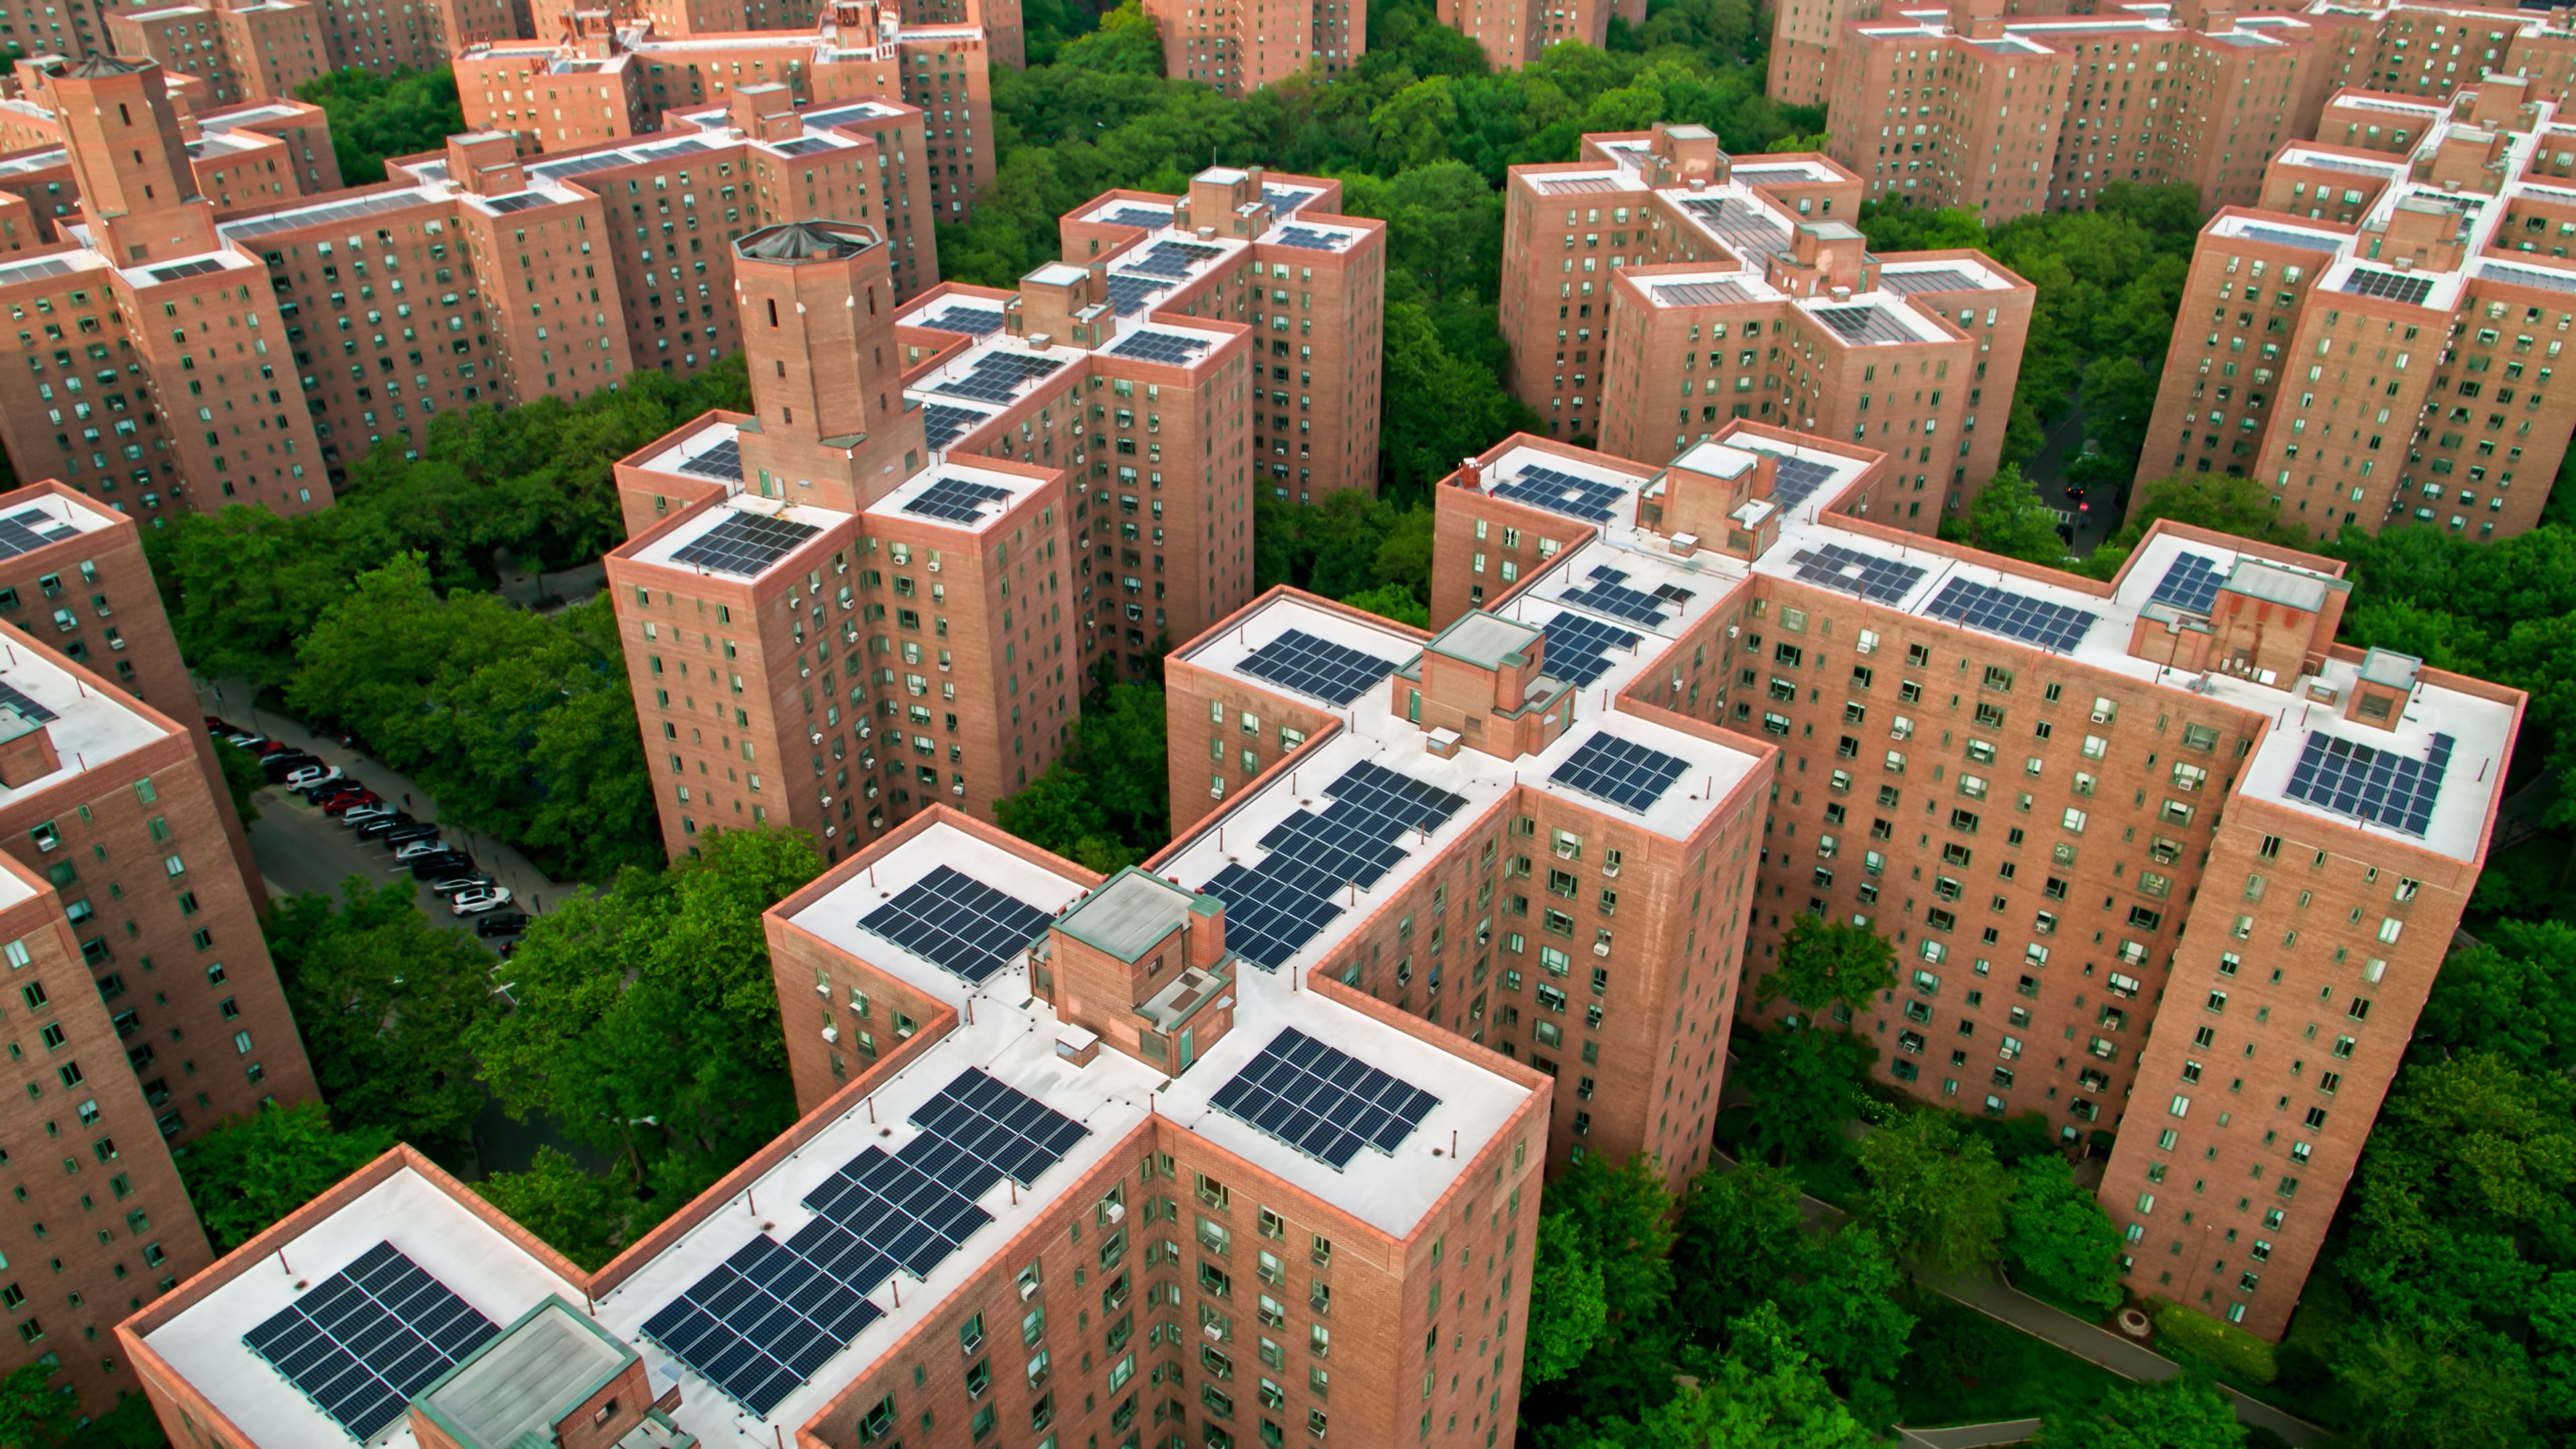 Aerial view of Stuytown with solar panels on the rooftops 